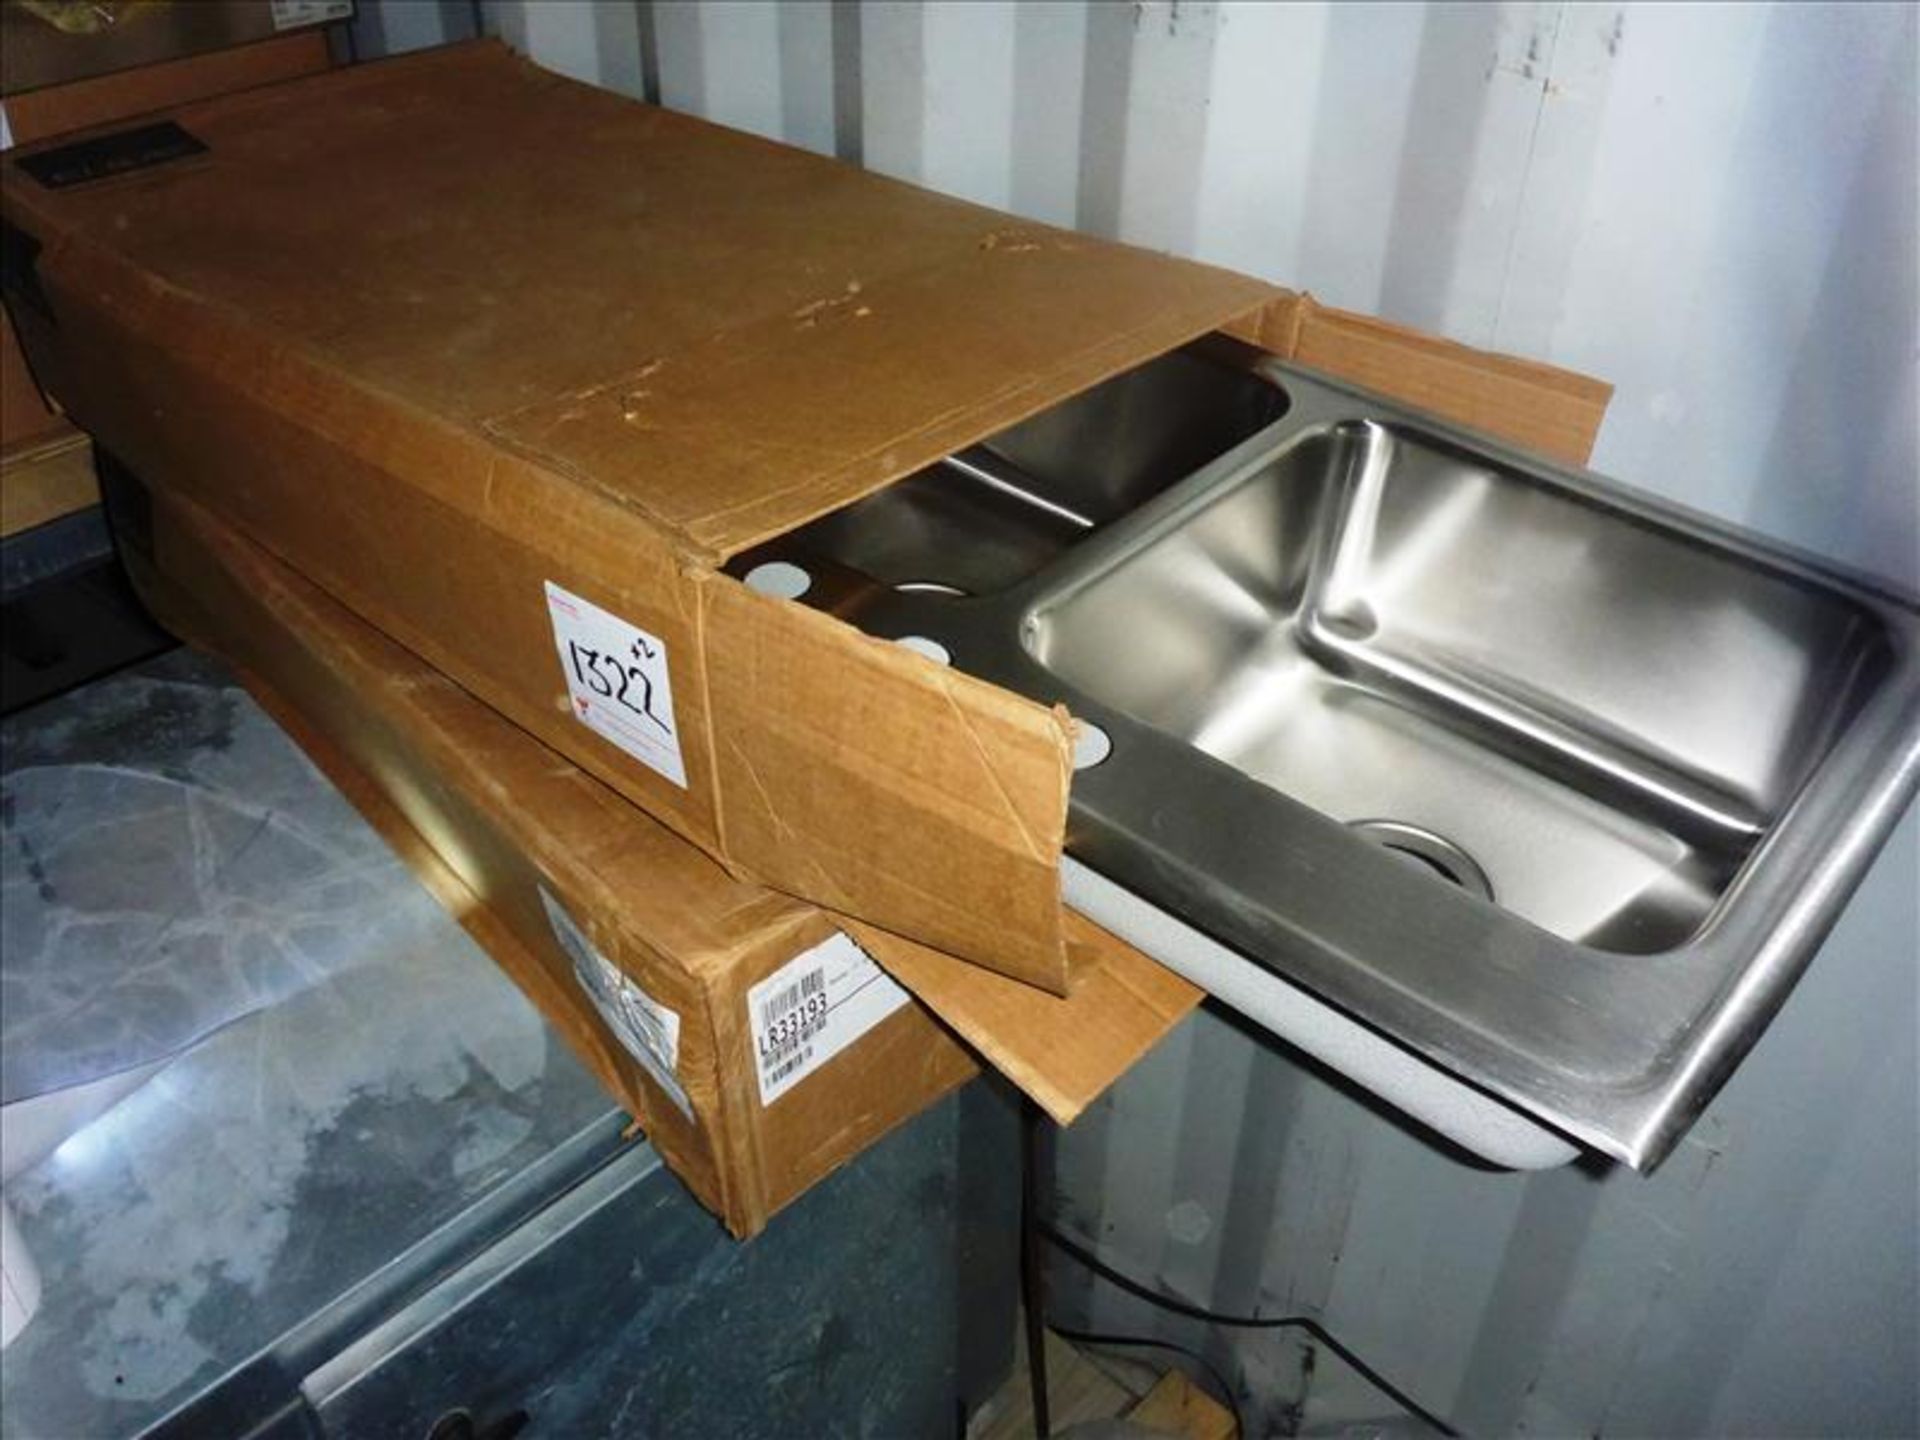 (2) new Elkay 2-compartment s/s sinks (Tag No. 1322)